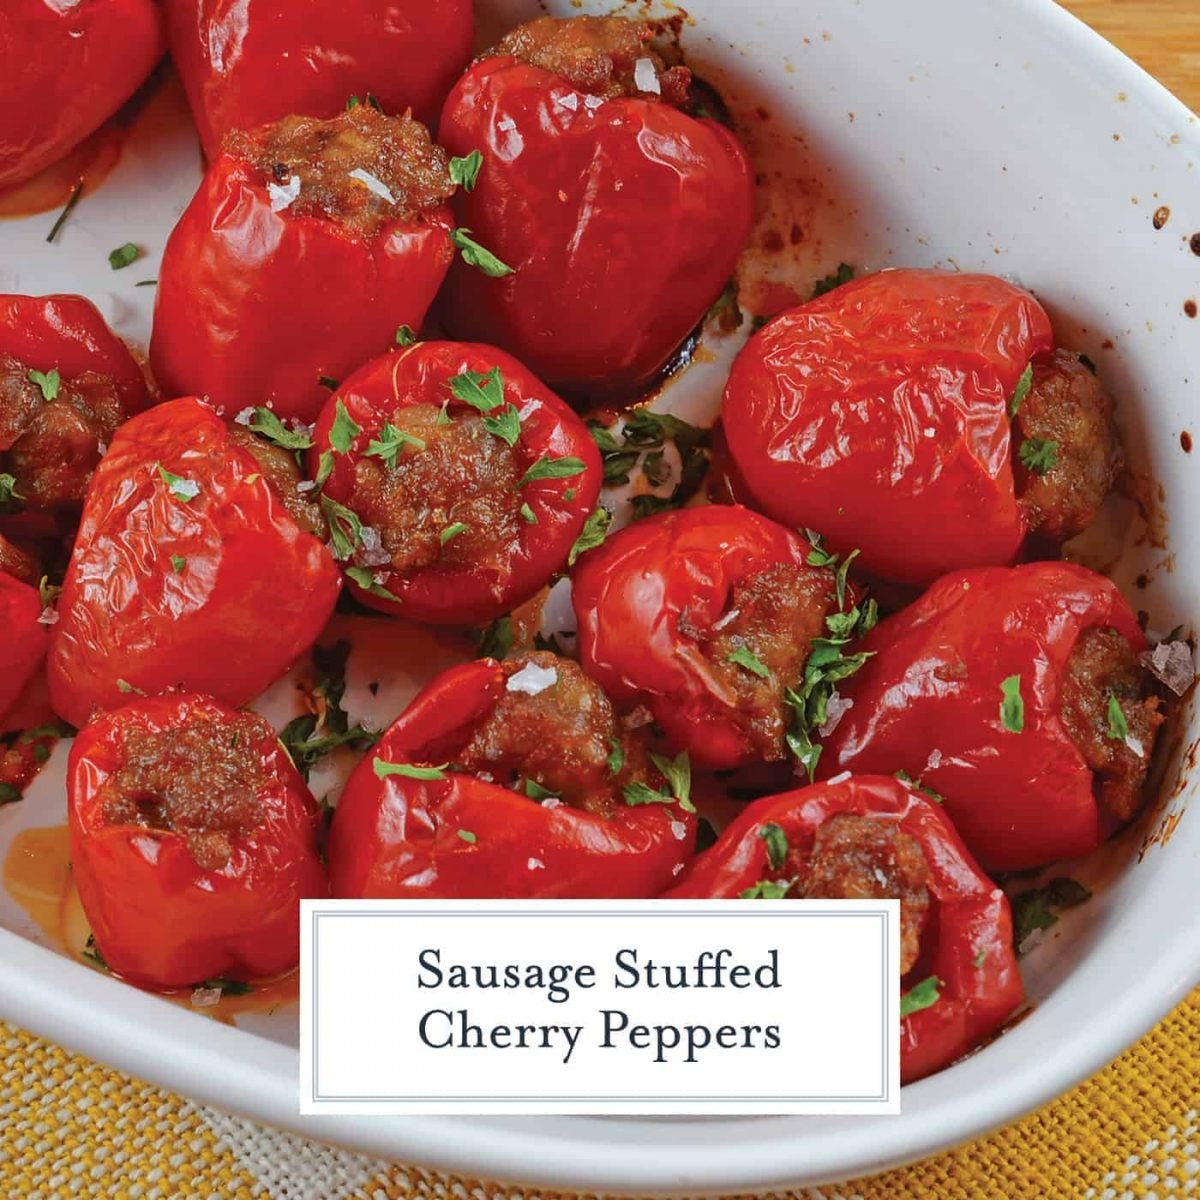 Sausage Stuffed Cherry Peppers are a tasty and easy appetizer recipe using only 5 ingredients. The perfect party food for any occasion! #stuffedpeppers #easyappetizers www.savoryexperiments.com